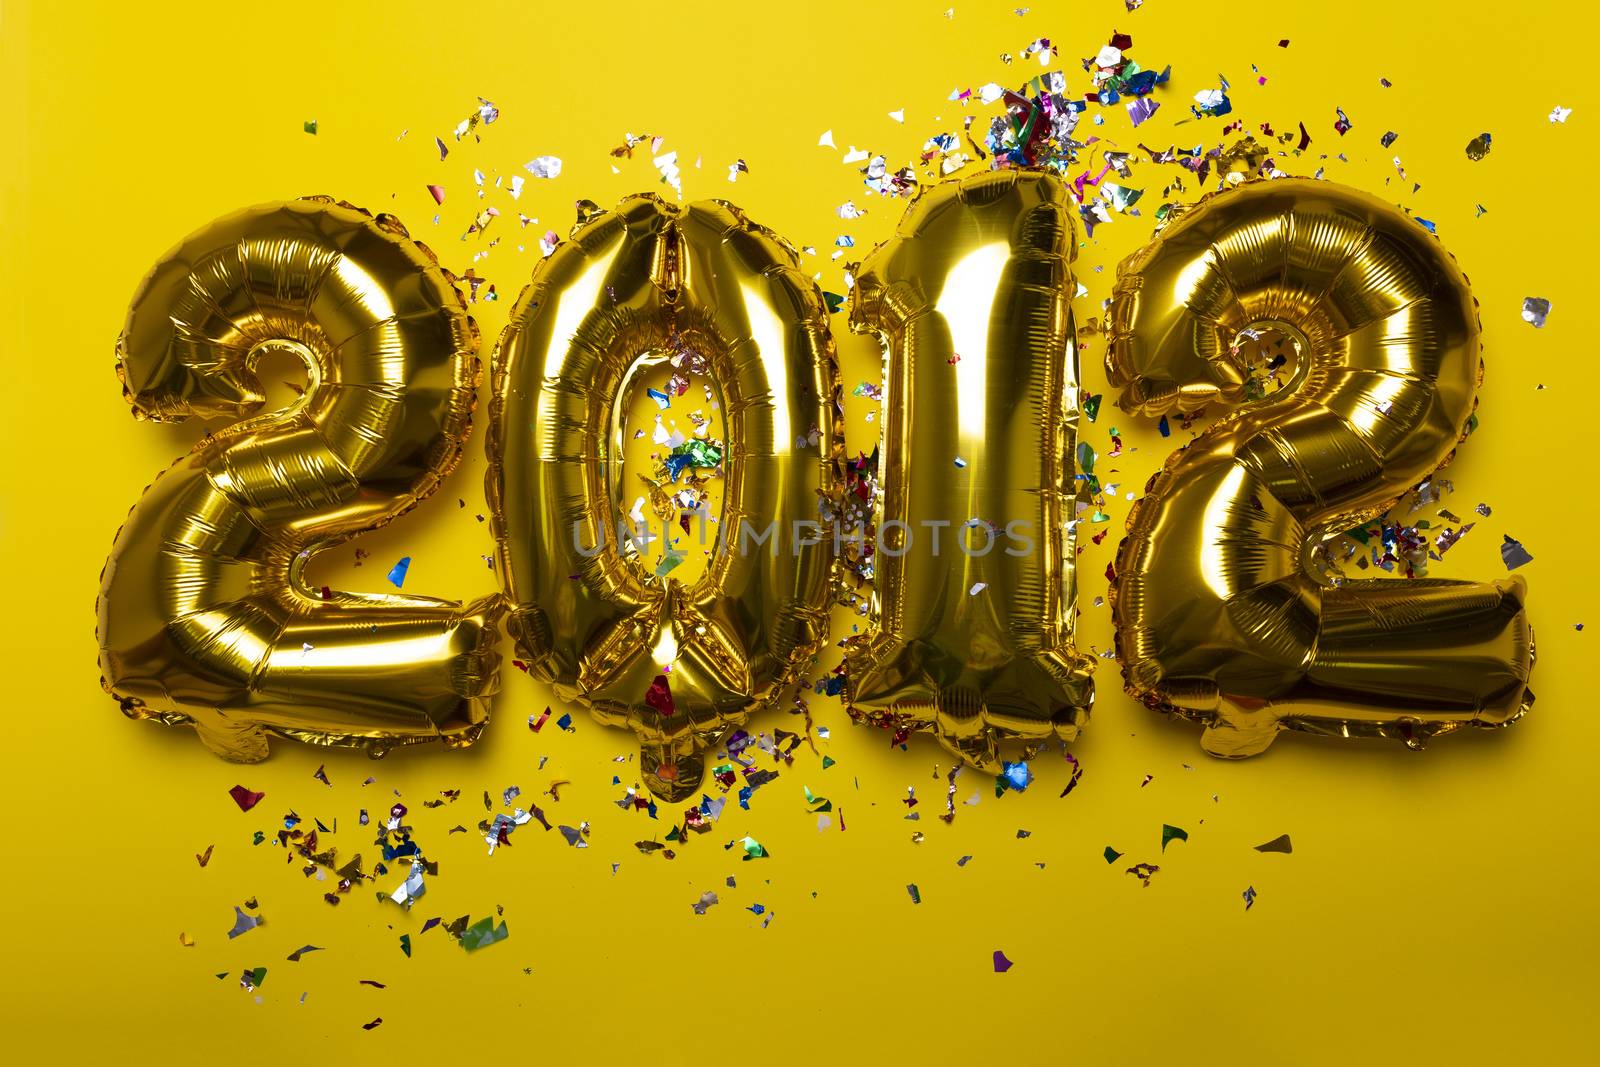 2021 new year concept from golden foil balloon and confetti on y by adamr